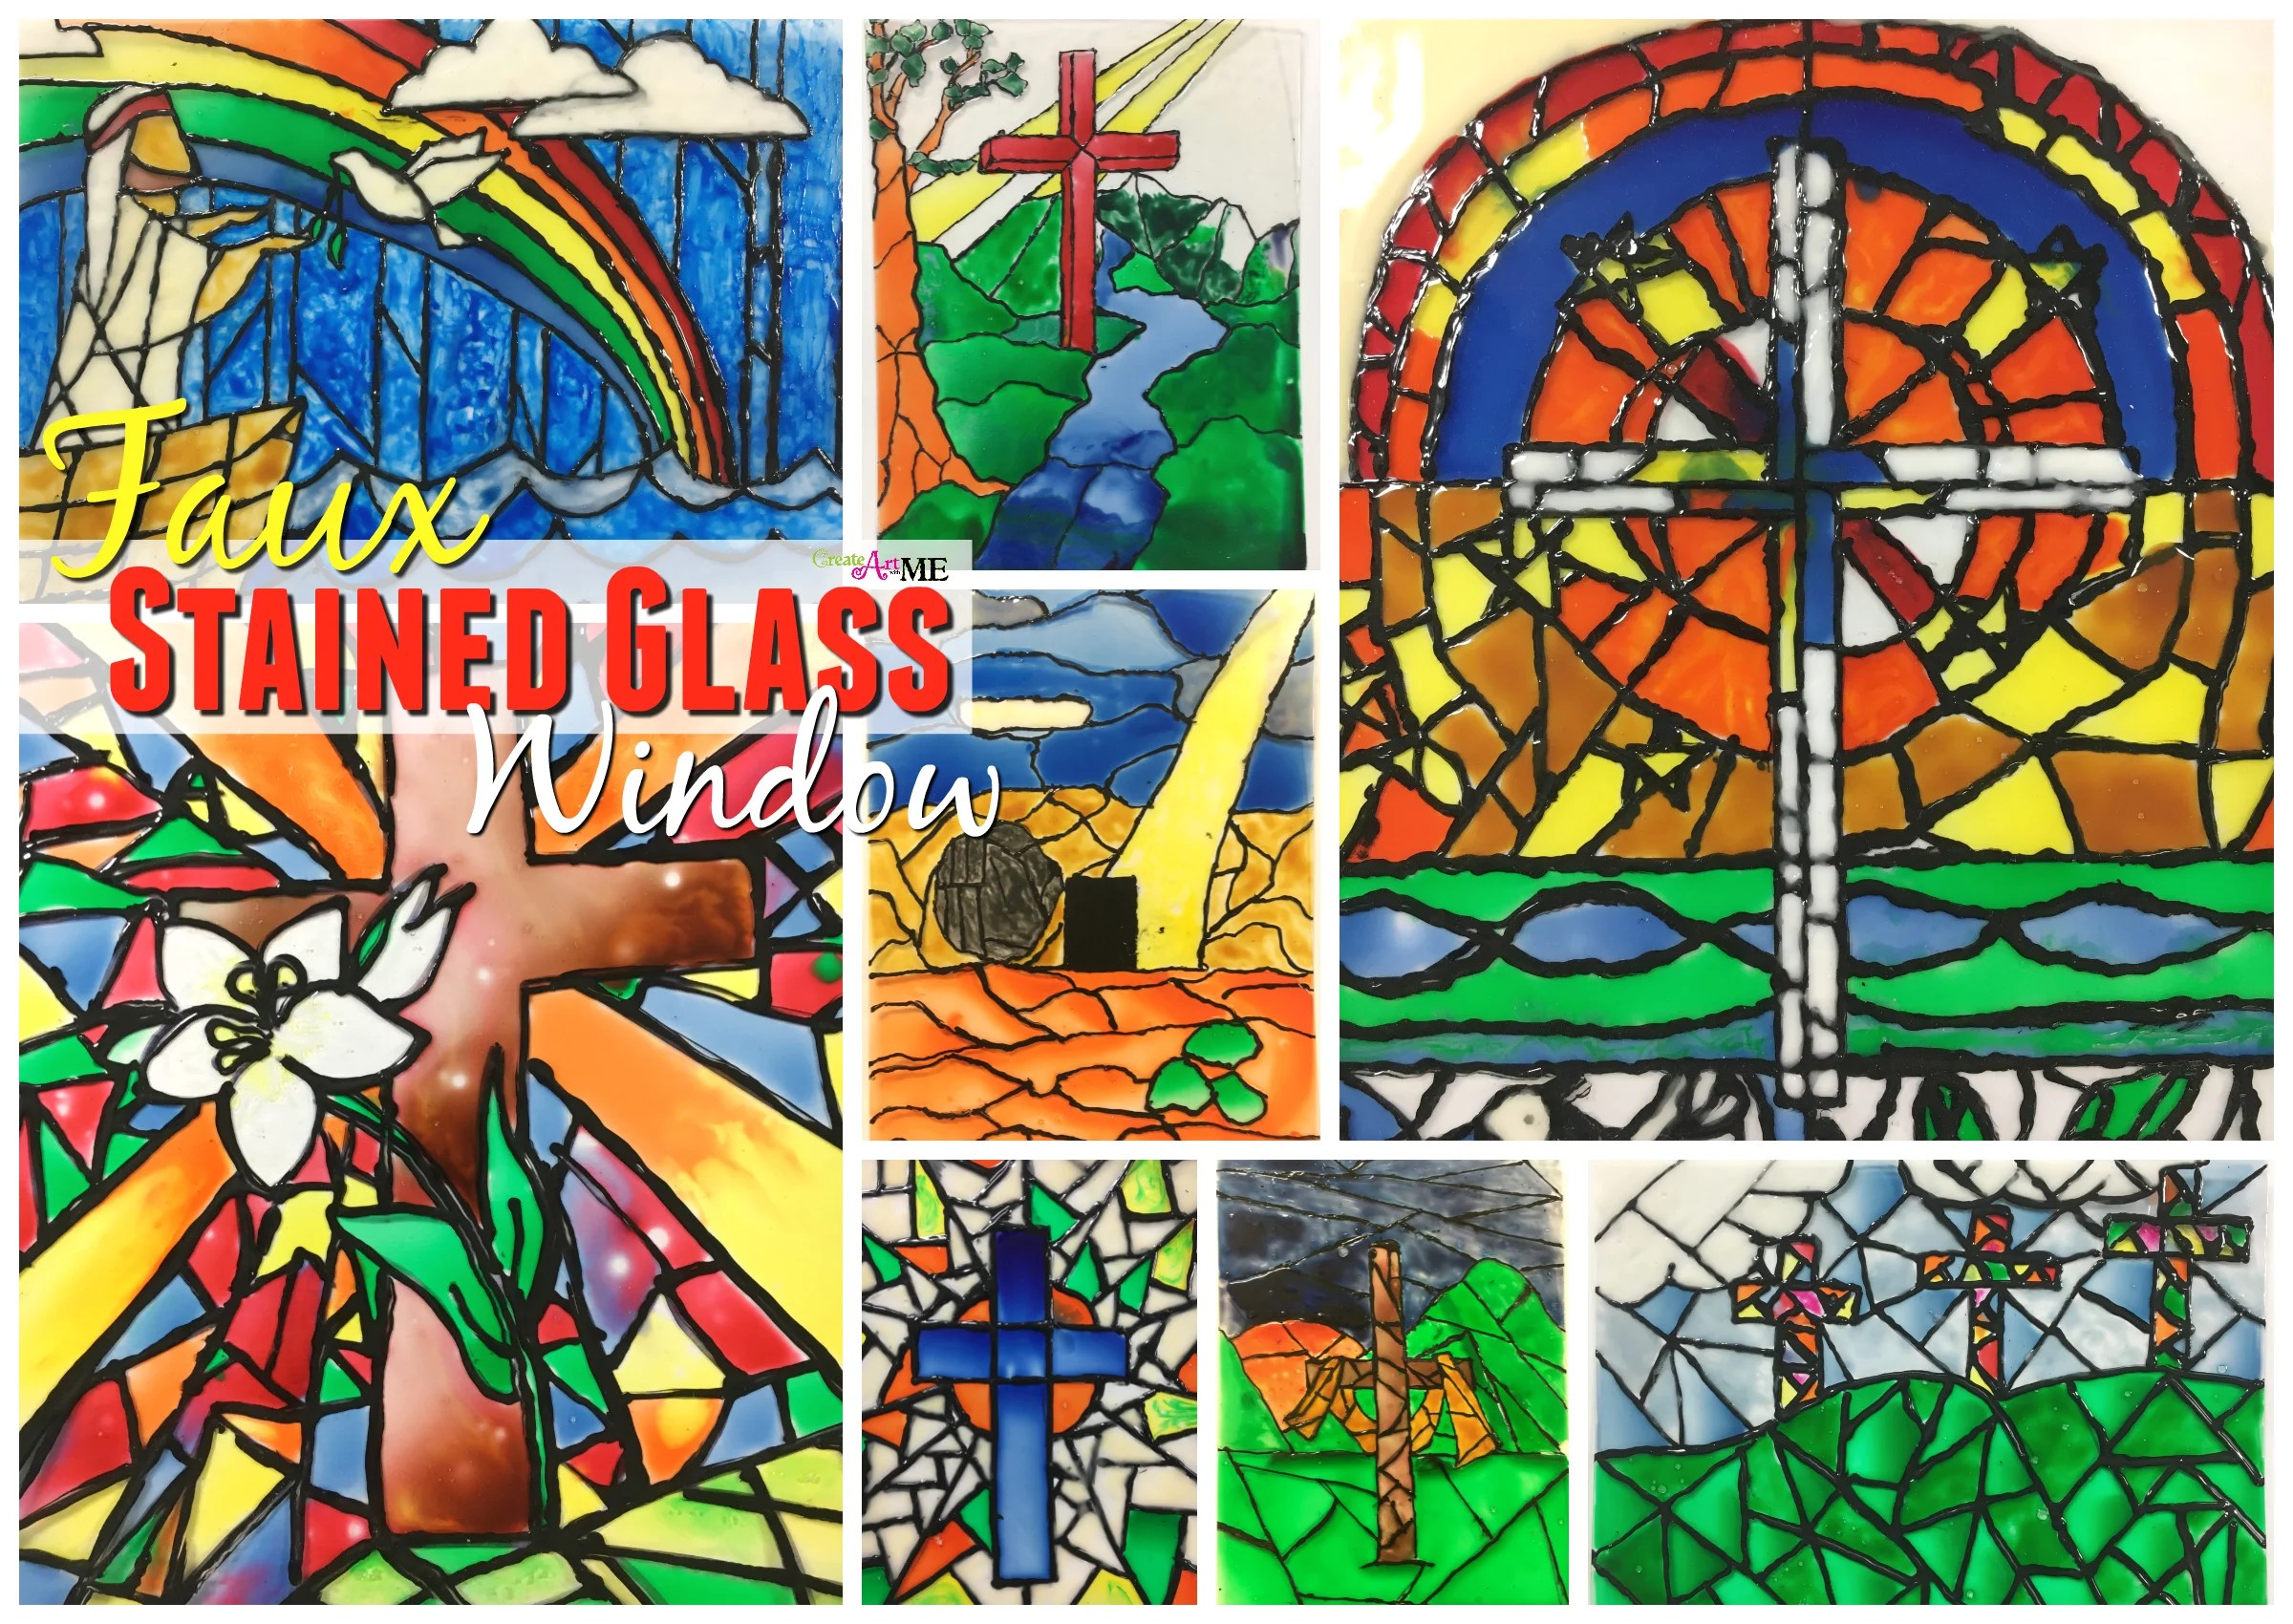 Faux stained glass window with biblical theme